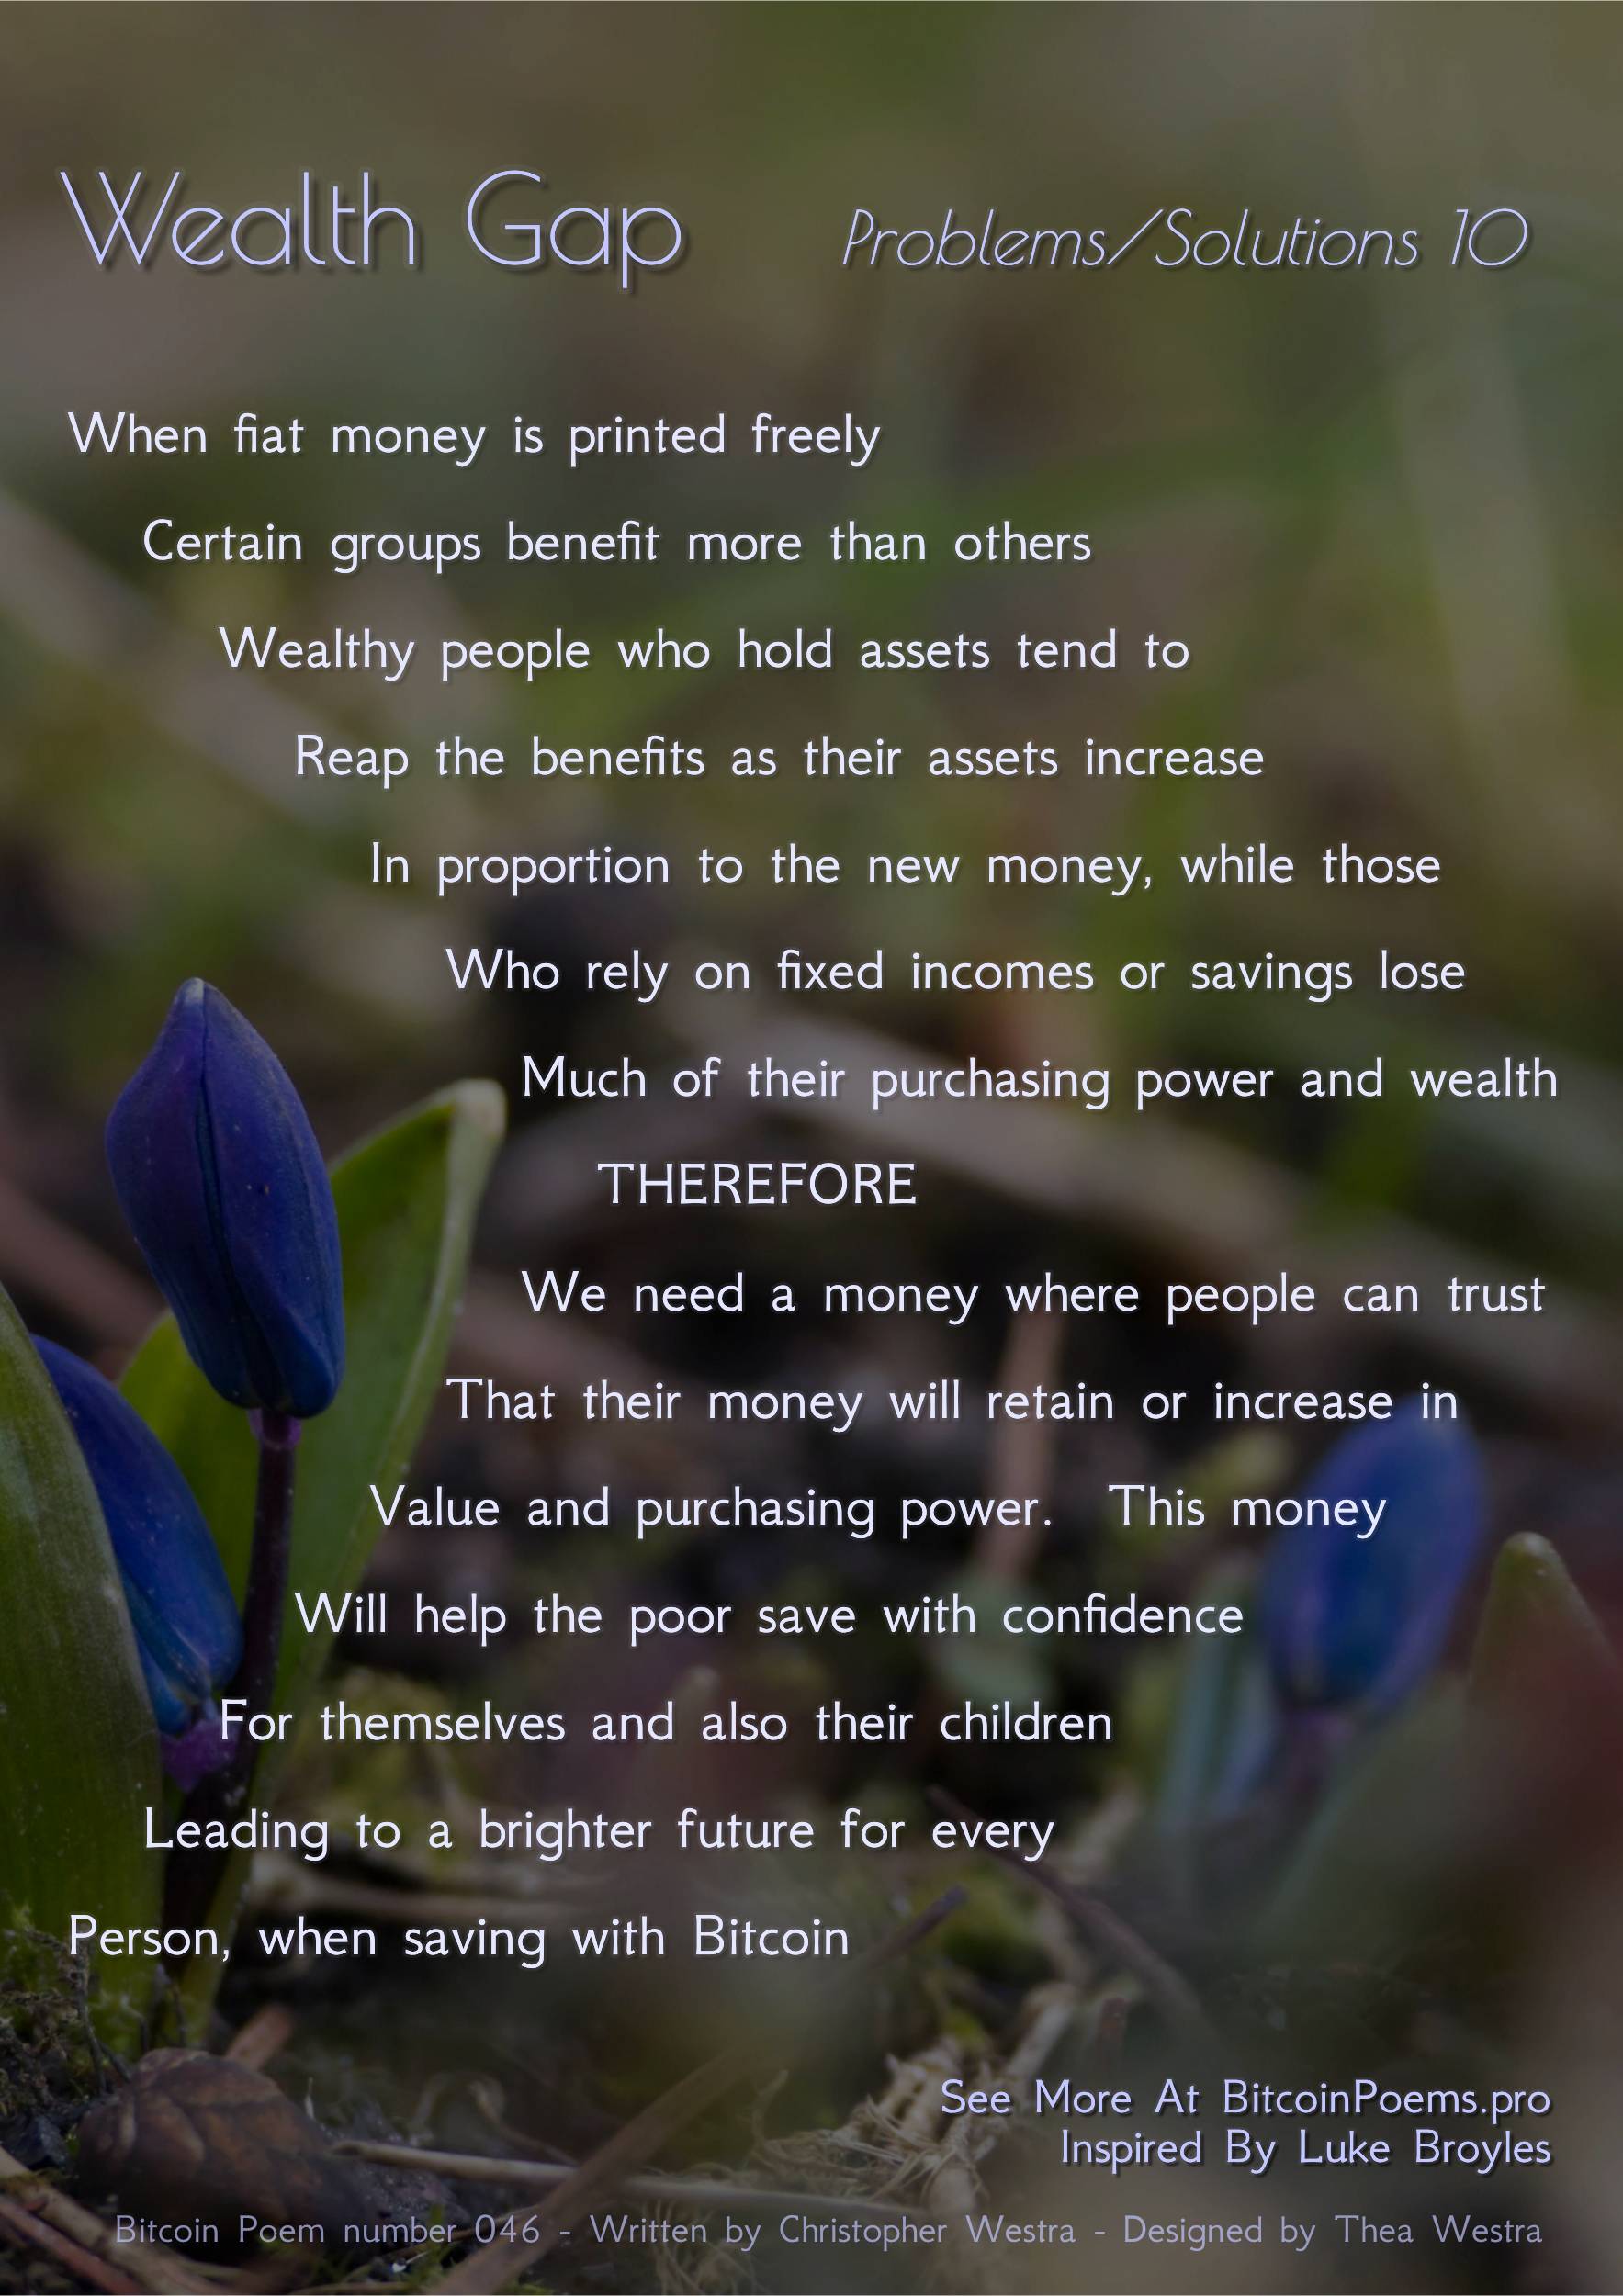 Wealth Gap - Bitcoin Poem 046 by Christopher Westra